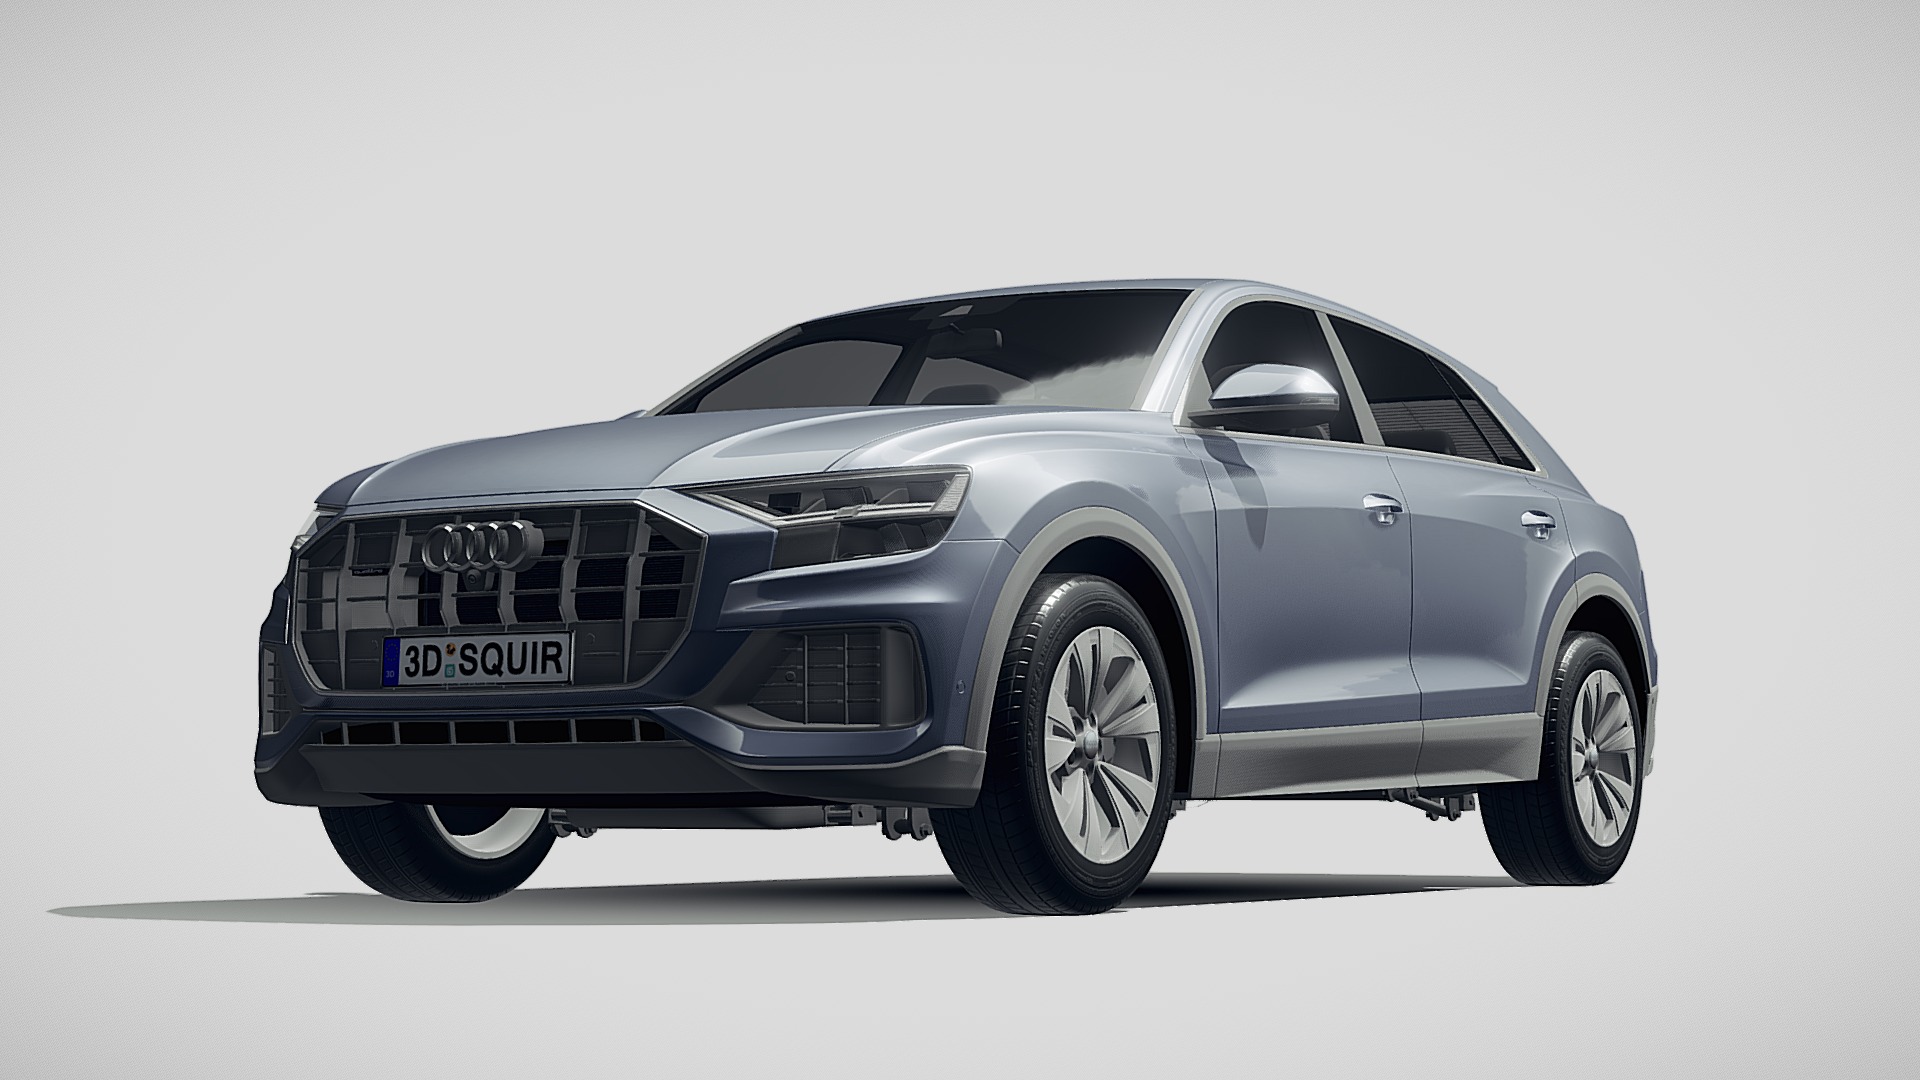 3D model Audi Q8 regular 2019 - This is a 3D model of the Audi Q8 regular 2019. The 3D model is about a silver car with a black background.